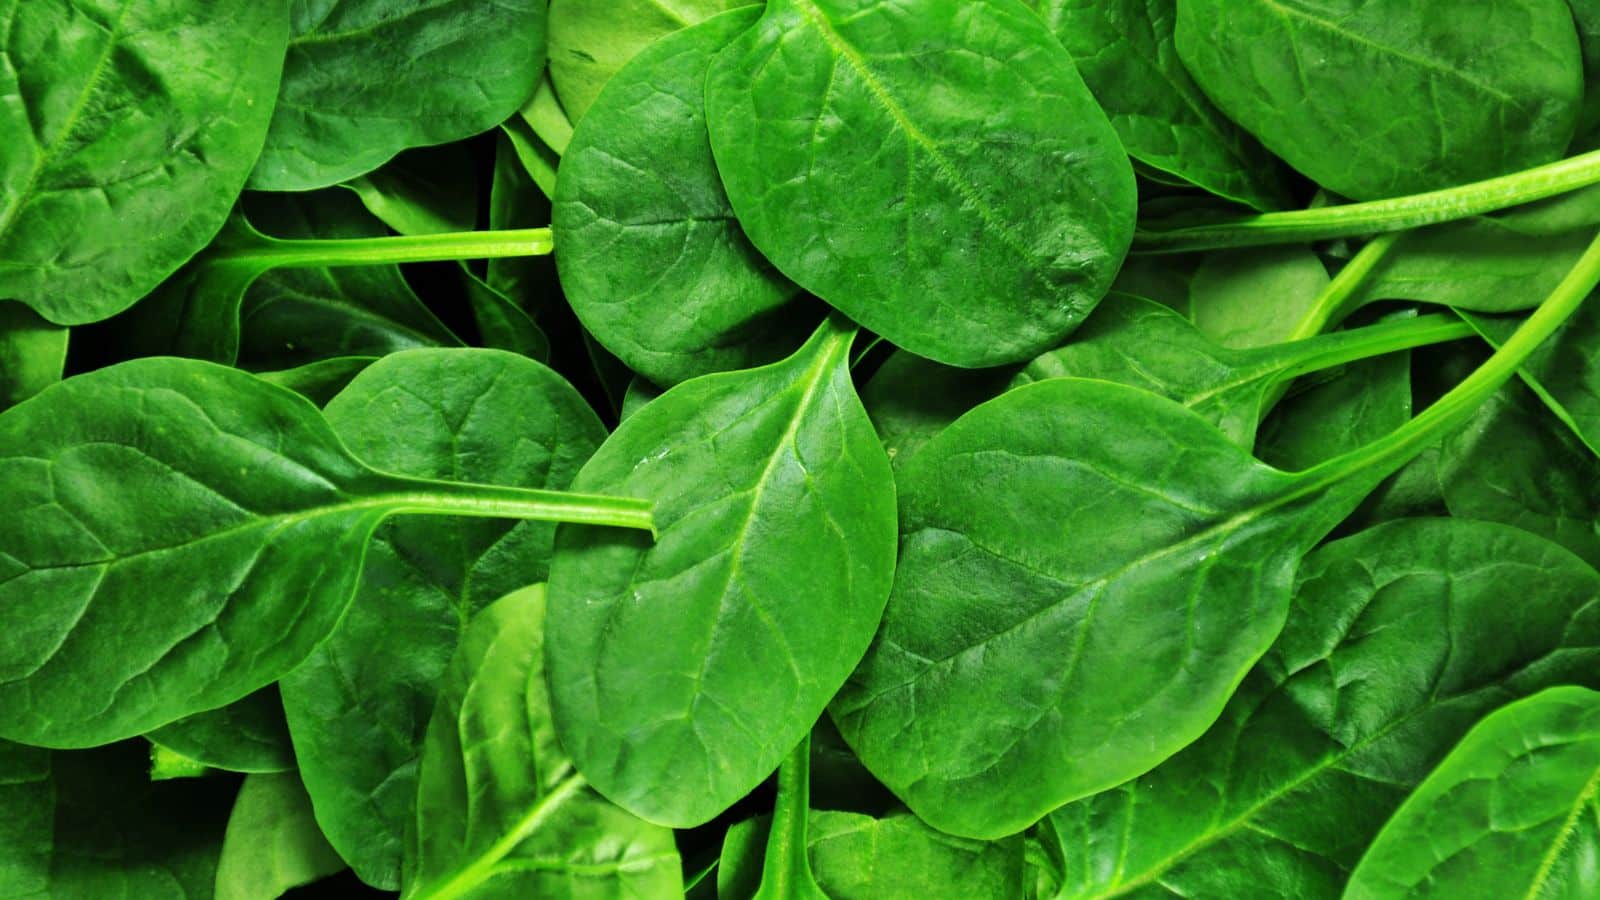 Fresh spinach leaves.
